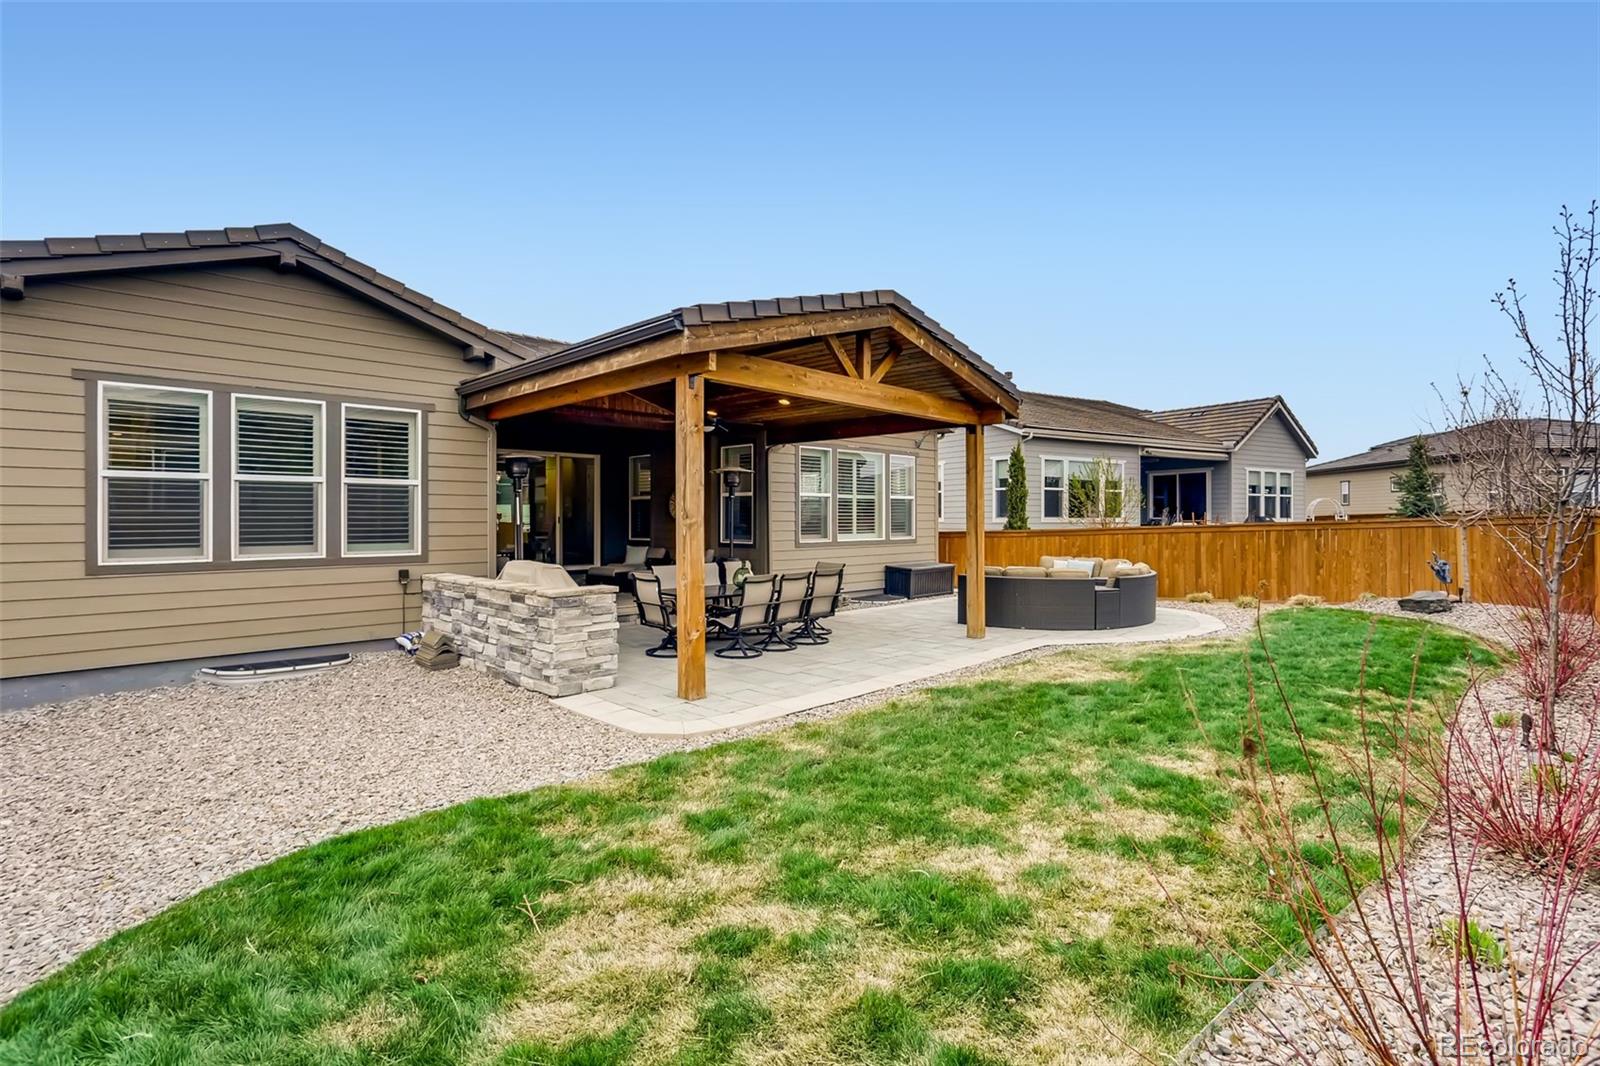 11151 Sweet Cicely, Parker, CO